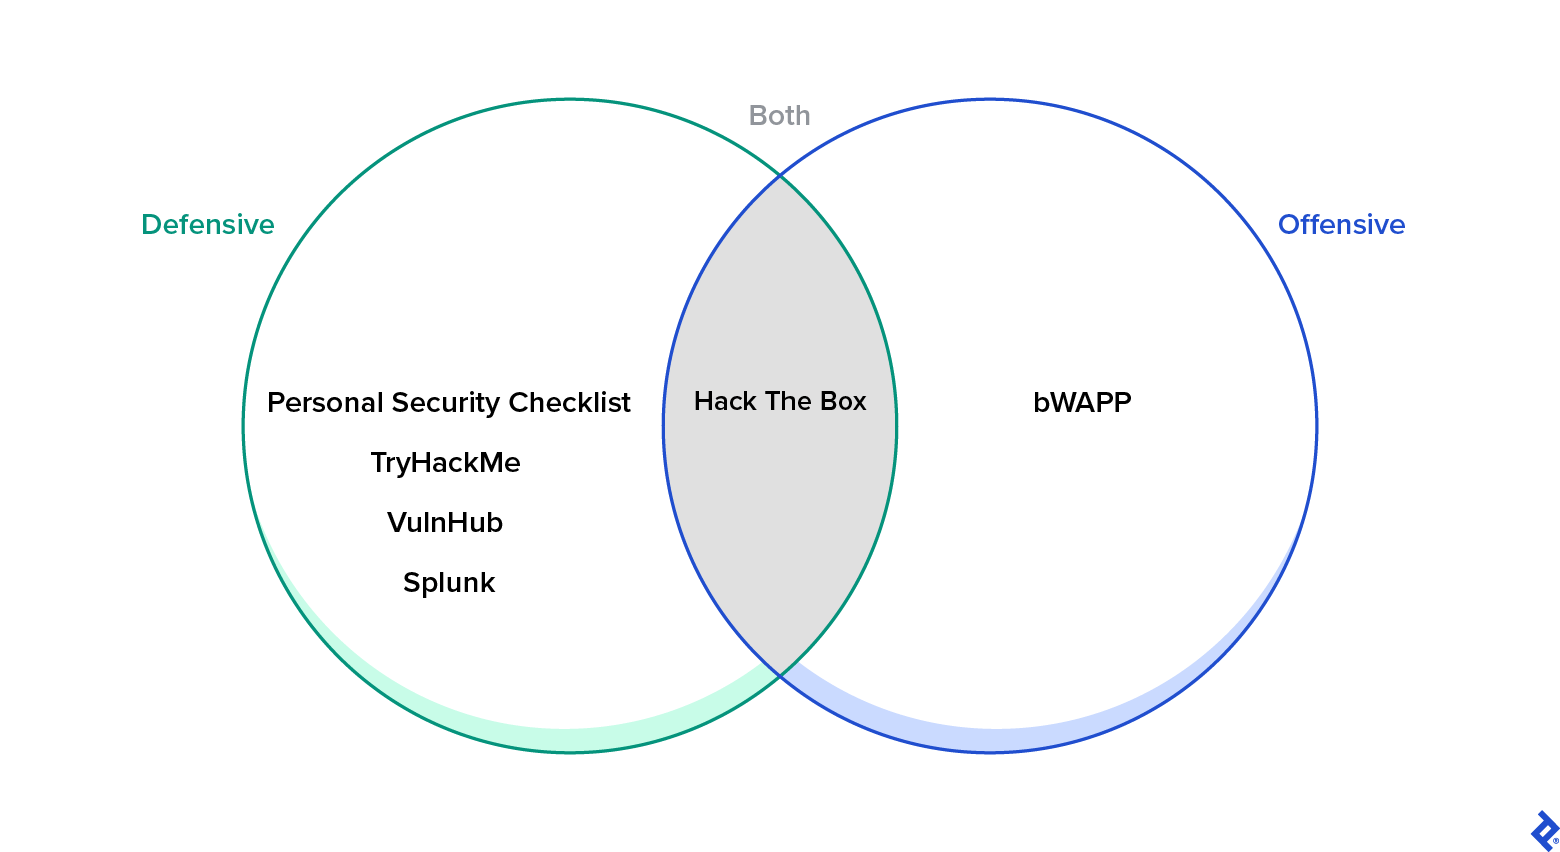 Tools to practice defensive security include Personal Security Checklist, TryHackMe, VulnHub, and Splunk. For offensive security practice, there’s bWAPP. Hack the Box allows for both.